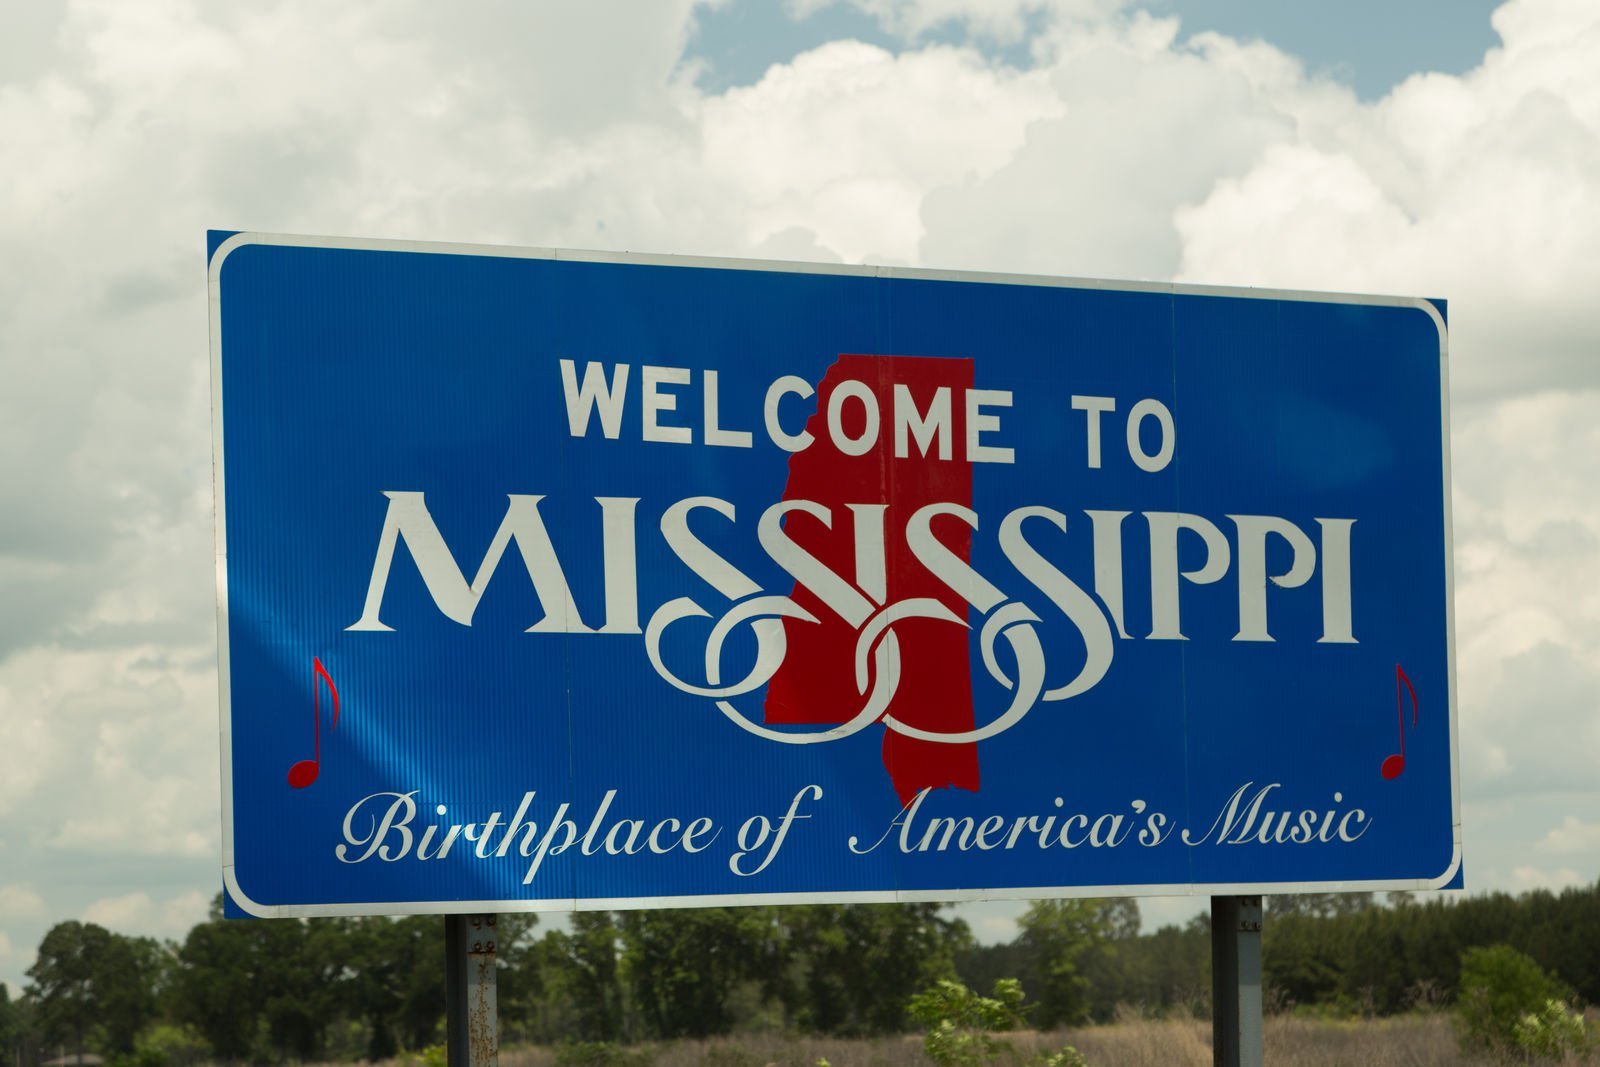 Mississippi Windshield Replacement Insurance: What are the Full Glass coverage laws in Mississippi?